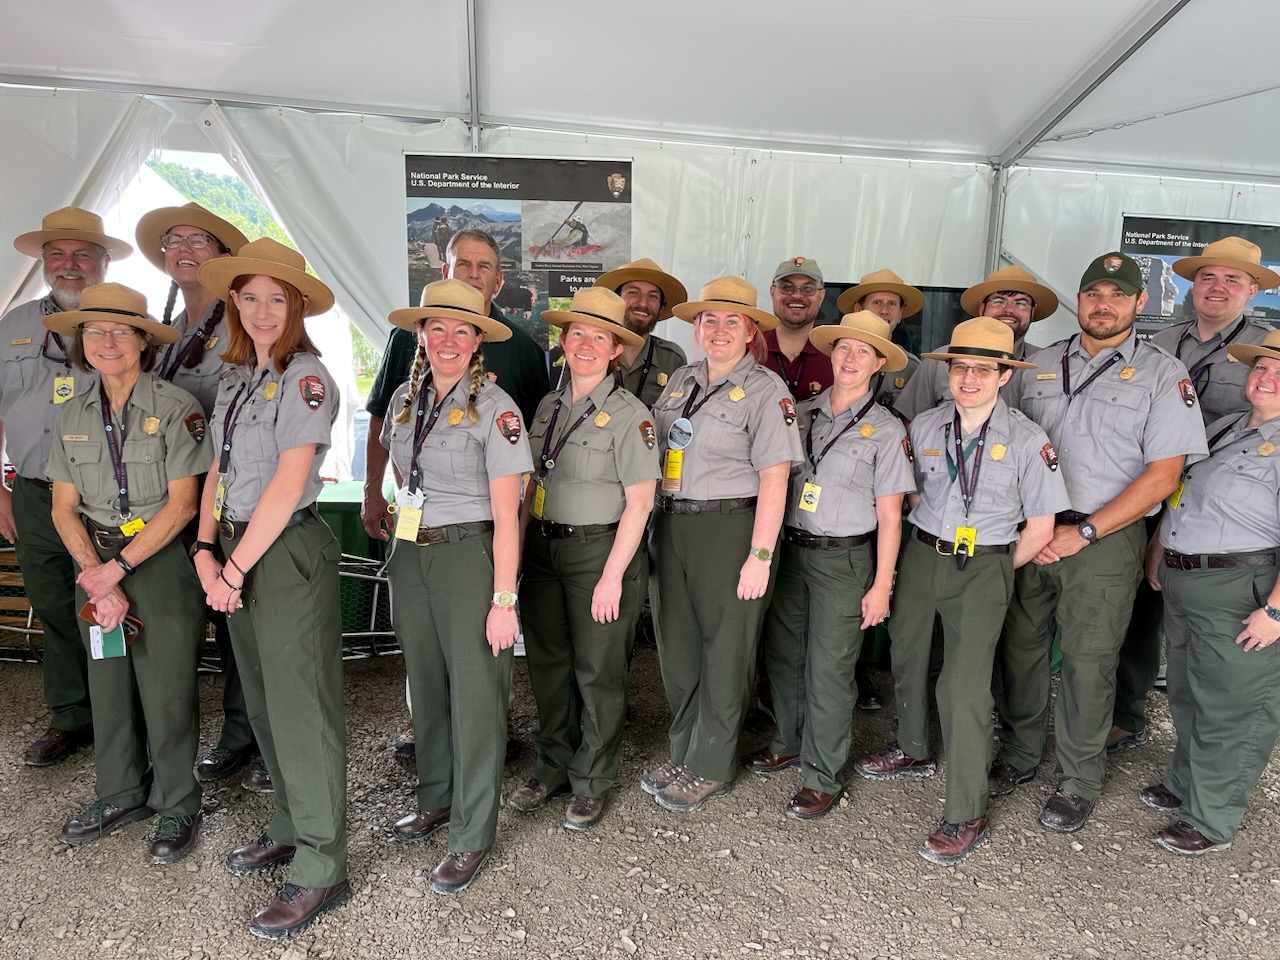 17 staff dressed in green pants and gray shirts, with gold badges, and the NPS logo. Most are wearing a flat hat with some in ball caps, and one without a hat.